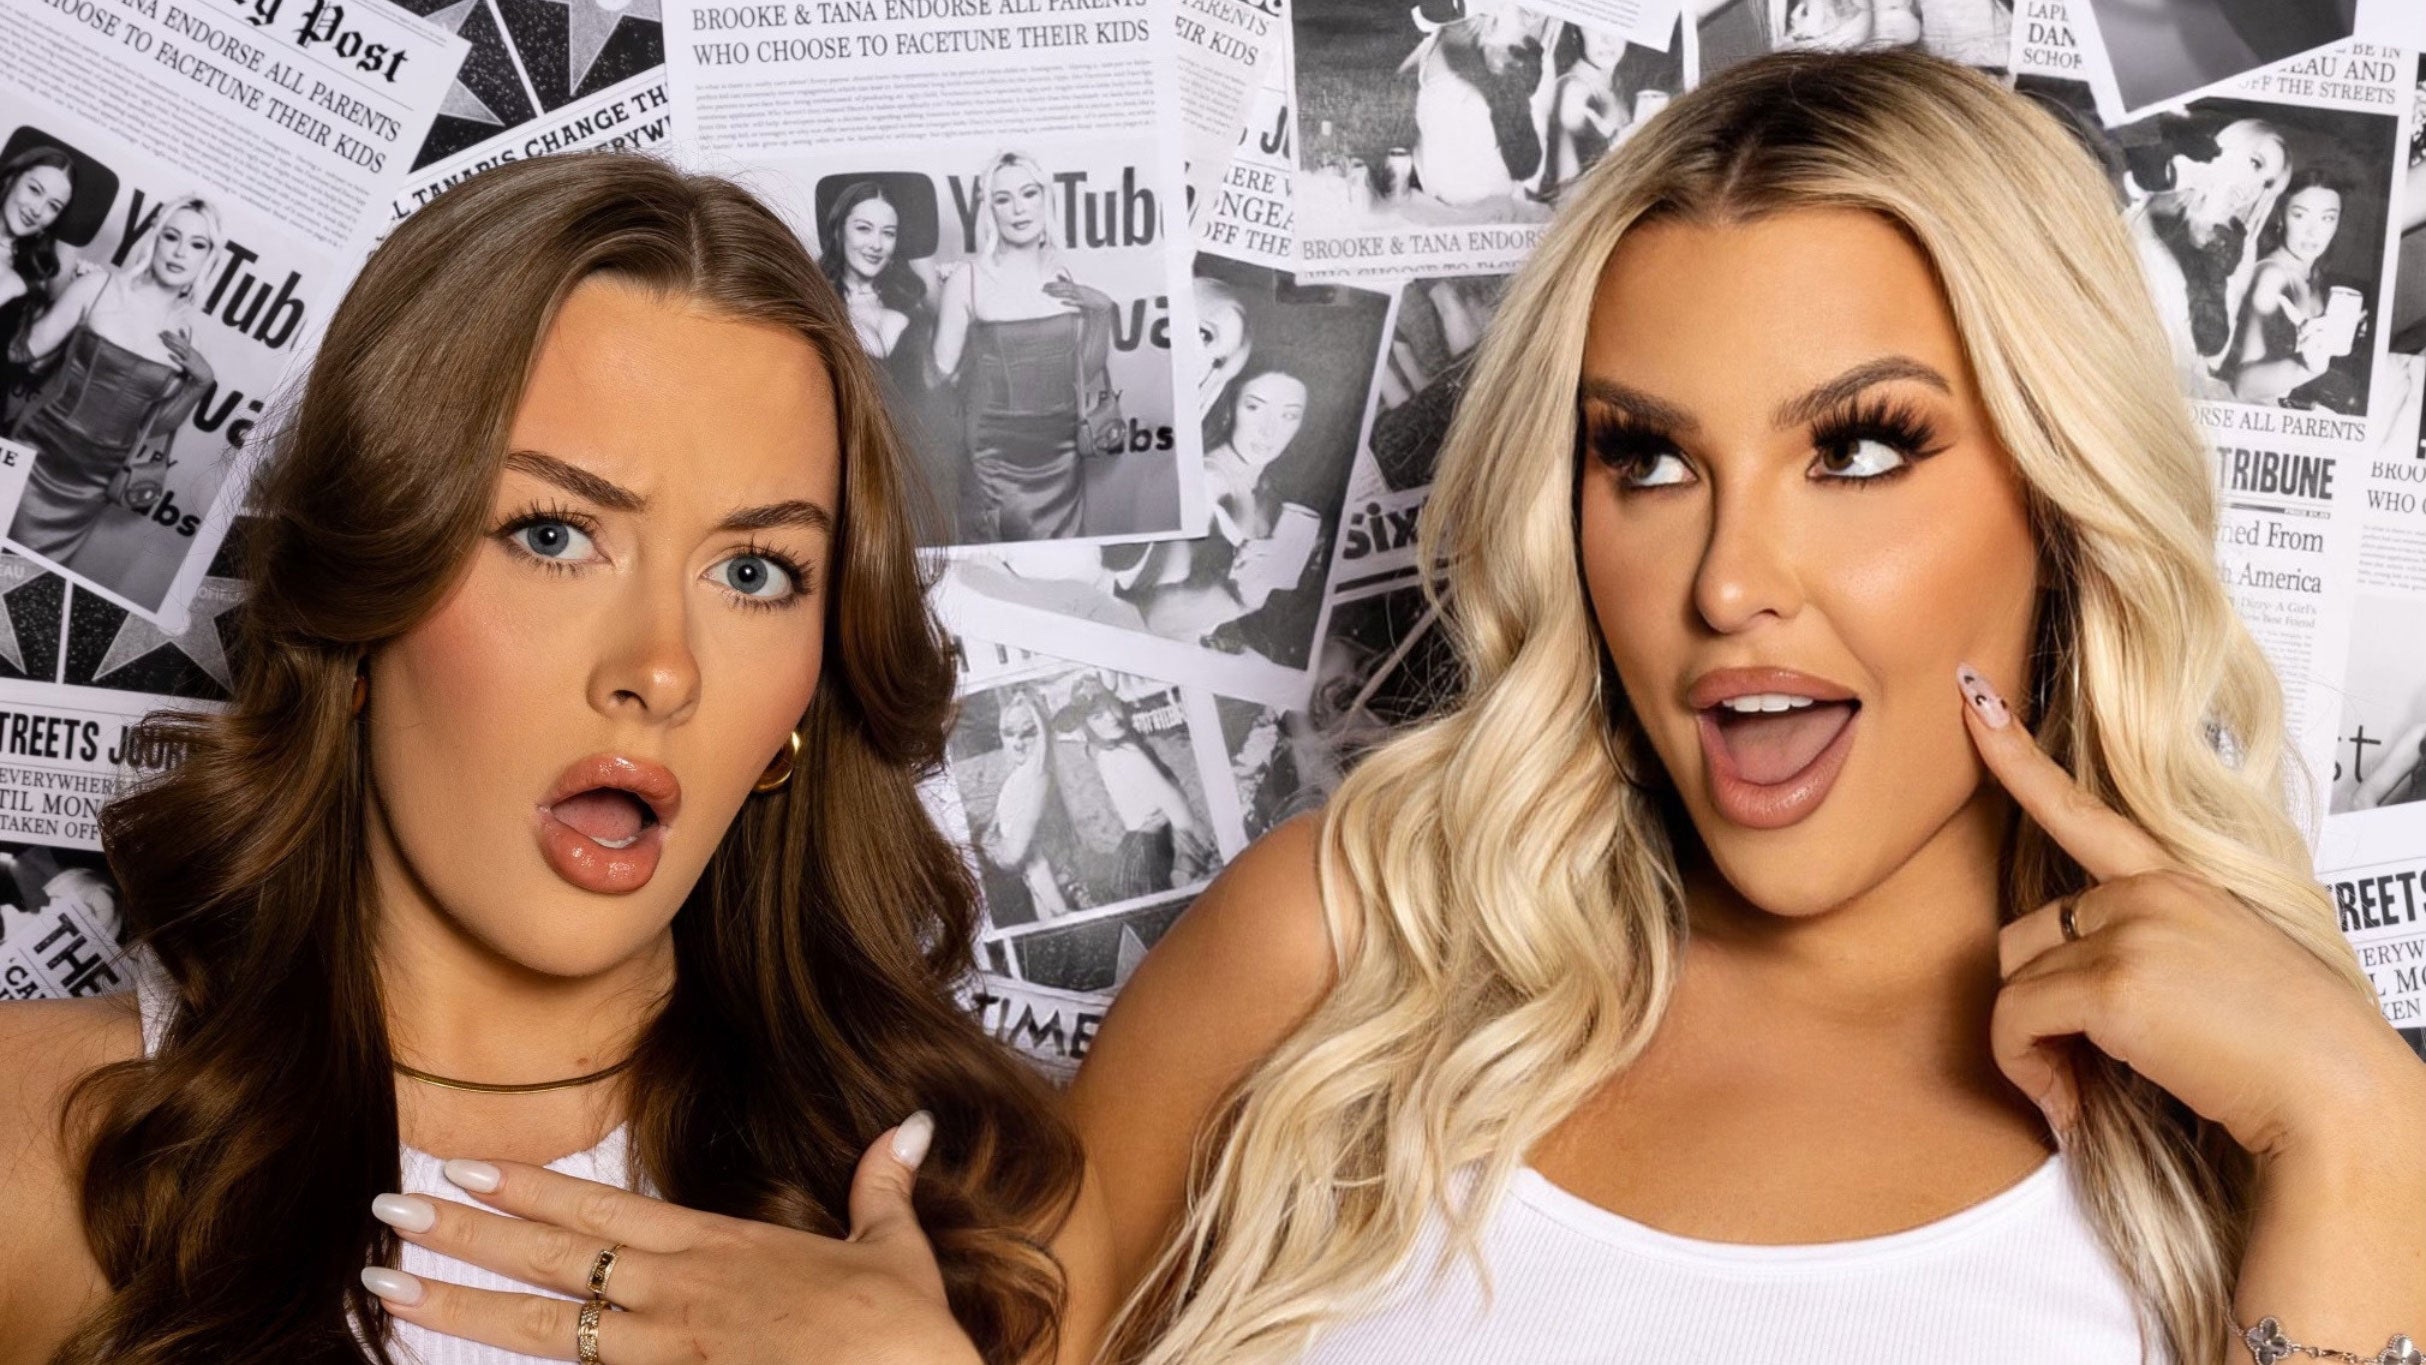 The Cancelled Podcast Tour With Tana Mongeau & Brooke Schofield pre-sale password for show tickets in San Francisco, CA (Palace of Fine Arts)